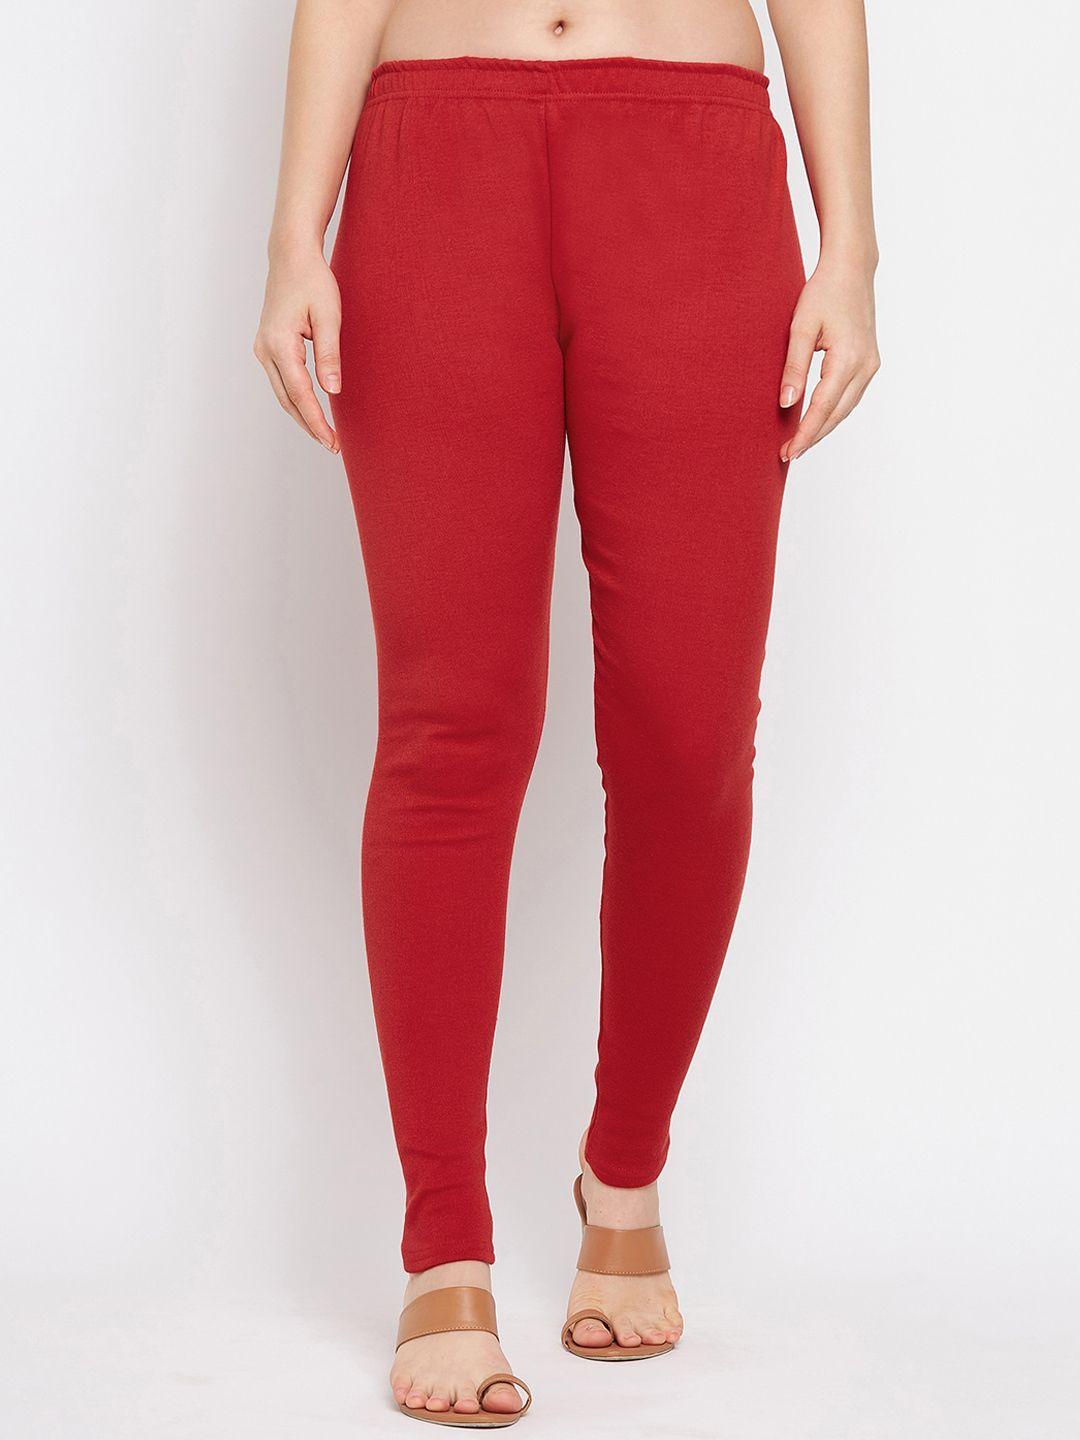 clora creation women red solid woolen ankle-length leggings